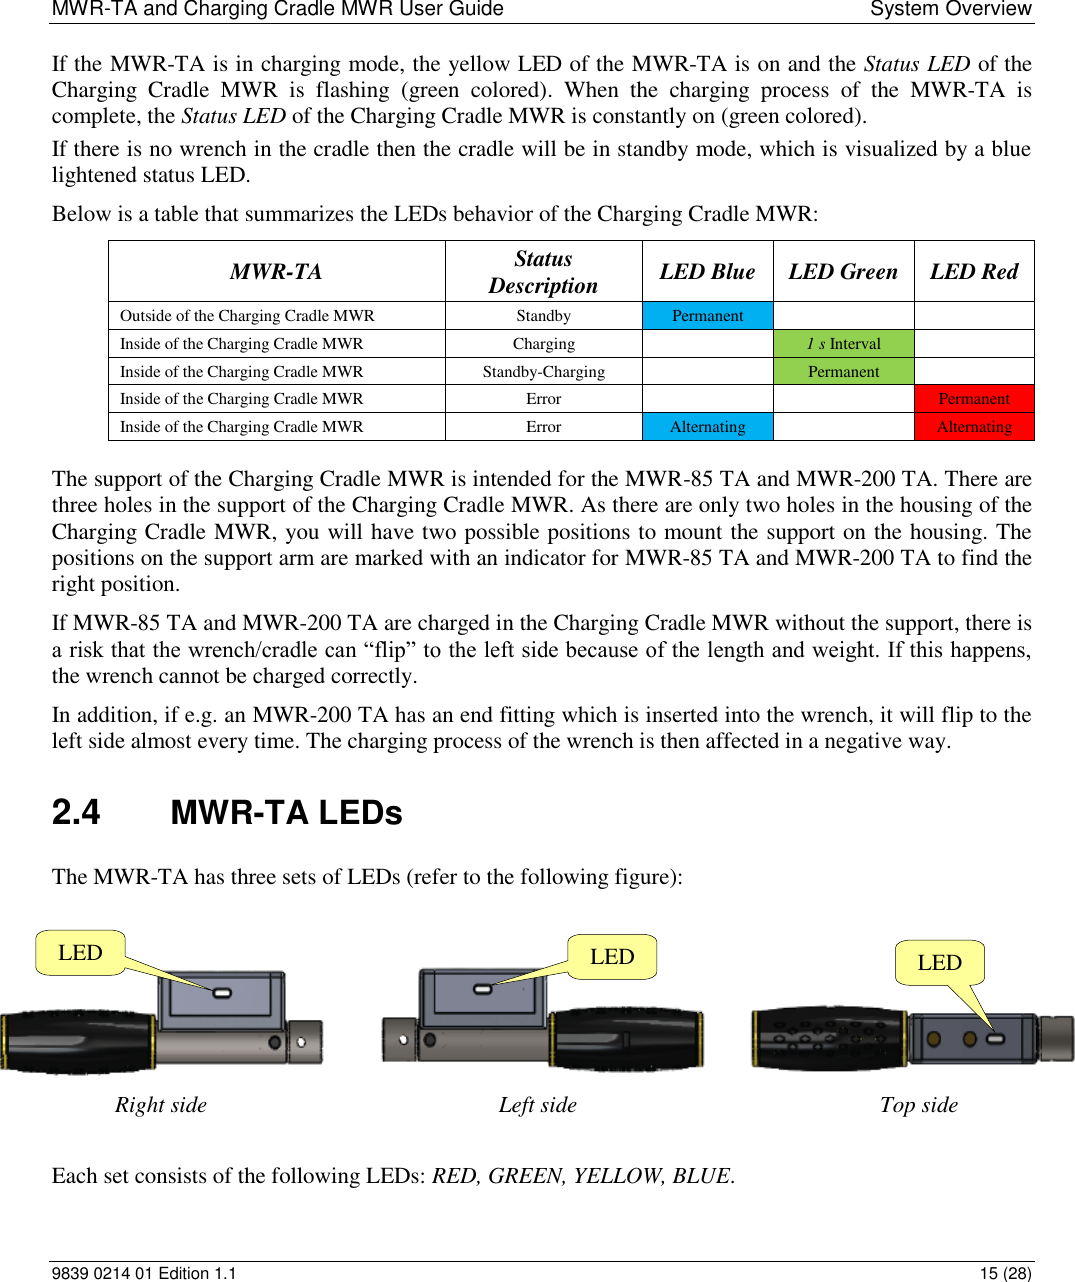 MWR-TA and Charging Cradle MWR User Guide  System Overview 9839 0214 01 Edition 1.1  15 (28) If the MWR-TA is in charging mode, the yellow LED of the MWR-TA is on and the Status LED of the Charging  Cradle  MWR  is  flashing  (green  colored).  When  the  charging  process  of  the  MWR-TA  is complete, the Status LED of the Charging Cradle MWR is constantly on (green colored). If there is no wrench in the cradle then the cradle will be in standby mode, which is visualized by a blue lightened status LED. Below is a table that summarizes the LEDs behavior of the Charging Cradle MWR: MWR-TA Status Description LED Blue LED Green LED Red Outside of the Charging Cradle MWR Standby Permanent   Inside of the Charging Cradle MWR Charging  1 s Interval  Inside of the Charging Cradle MWR Standby-Charging  Permanent  Inside of the Charging Cradle MWR Error   Permanent Inside of the Charging Cradle MWR Error Alternating  Alternating The support of the Charging Cradle MWR is intended for the MWR-85 TA and MWR-200 TA. There are three holes in the support of the Charging Cradle MWR. As there are only two holes in the housing of the Charging Cradle MWR, you will have two possible positions to mount the support on the housing. The positions on the support arm are marked with an indicator for MWR-85 TA and MWR-200 TA to find the right position. If MWR-85 TA and MWR-200 TA are charged in the Charging Cradle MWR without the support, there is a risk that the wrench/cradle can “flip” to the left side because of the length and weight. If this happens, the wrench cannot be charged correctly.  In addition, if e.g. an MWR-200 TA has an end fitting which is inserted into the wrench, it will flip to the left side almost every time. The charging process of the wrench is then affected in a negative way. 2.4  MWR-TA LEDs The MWR-TA has three sets of LEDs (refer to the following figure):  Each set consists of the following LEDs: RED, GREEN, YELLOW, BLUE.  LED LED LED Top side Left side Right side 